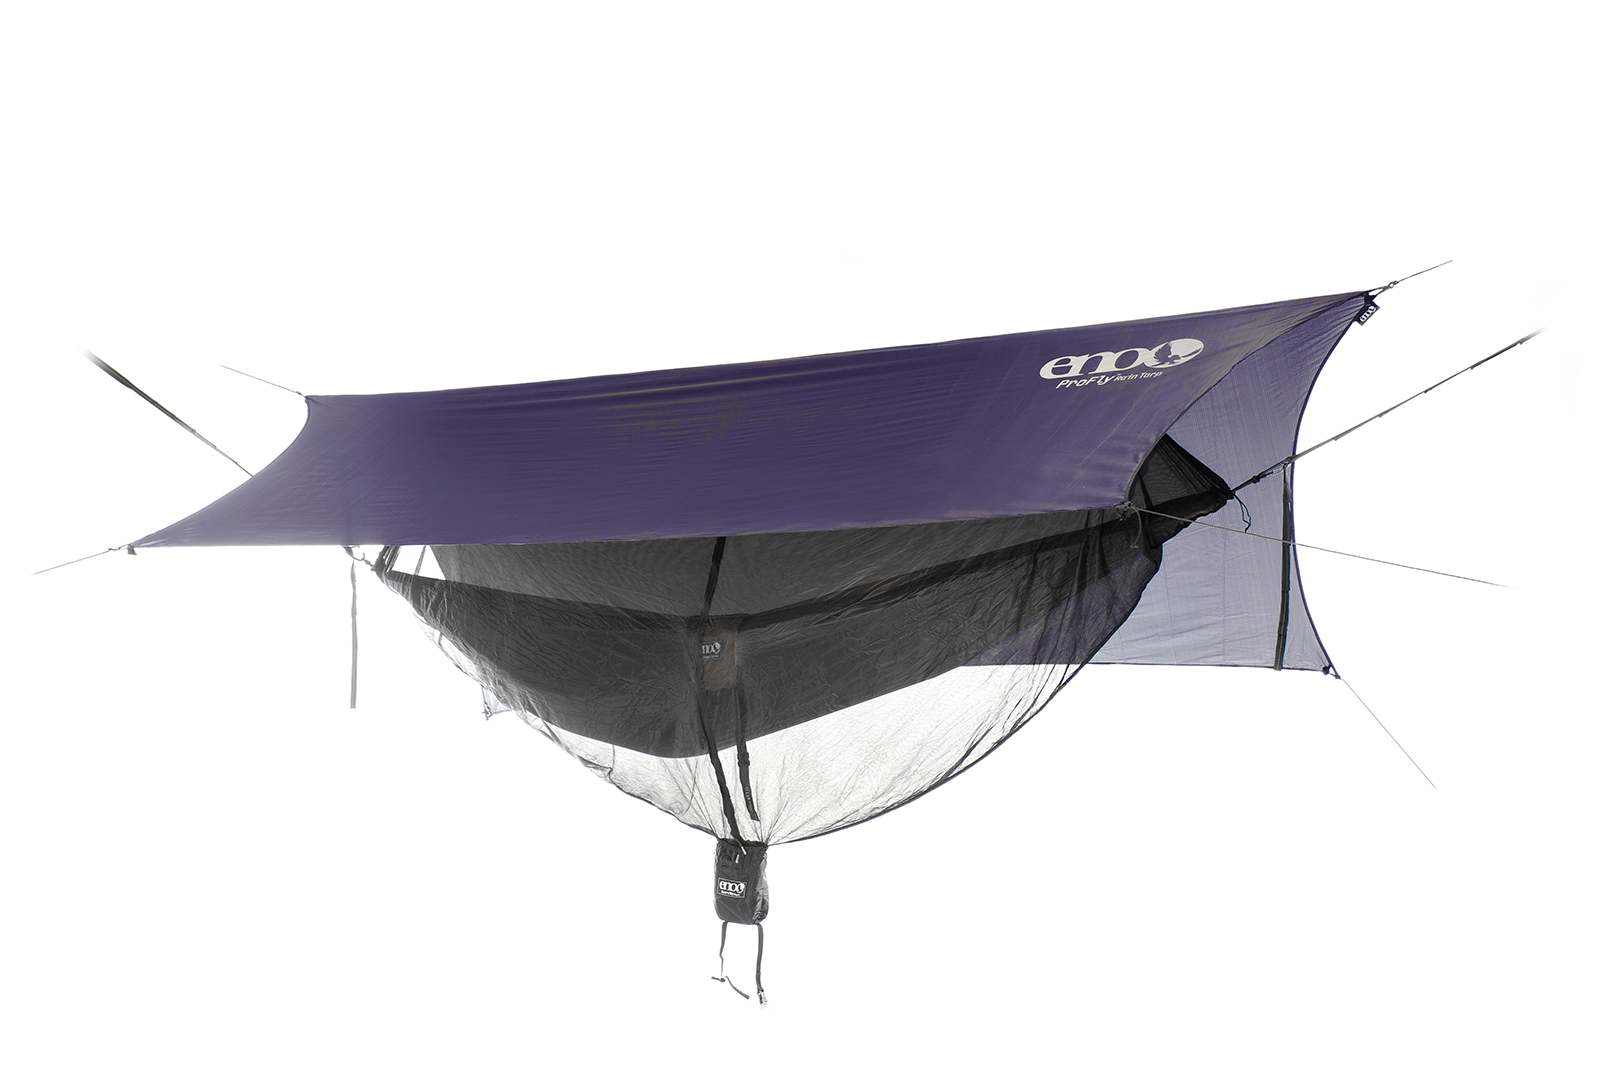 Eagles Nest Outfitters Hammock Shelter System, ENO OneLink Hammock Shelter System